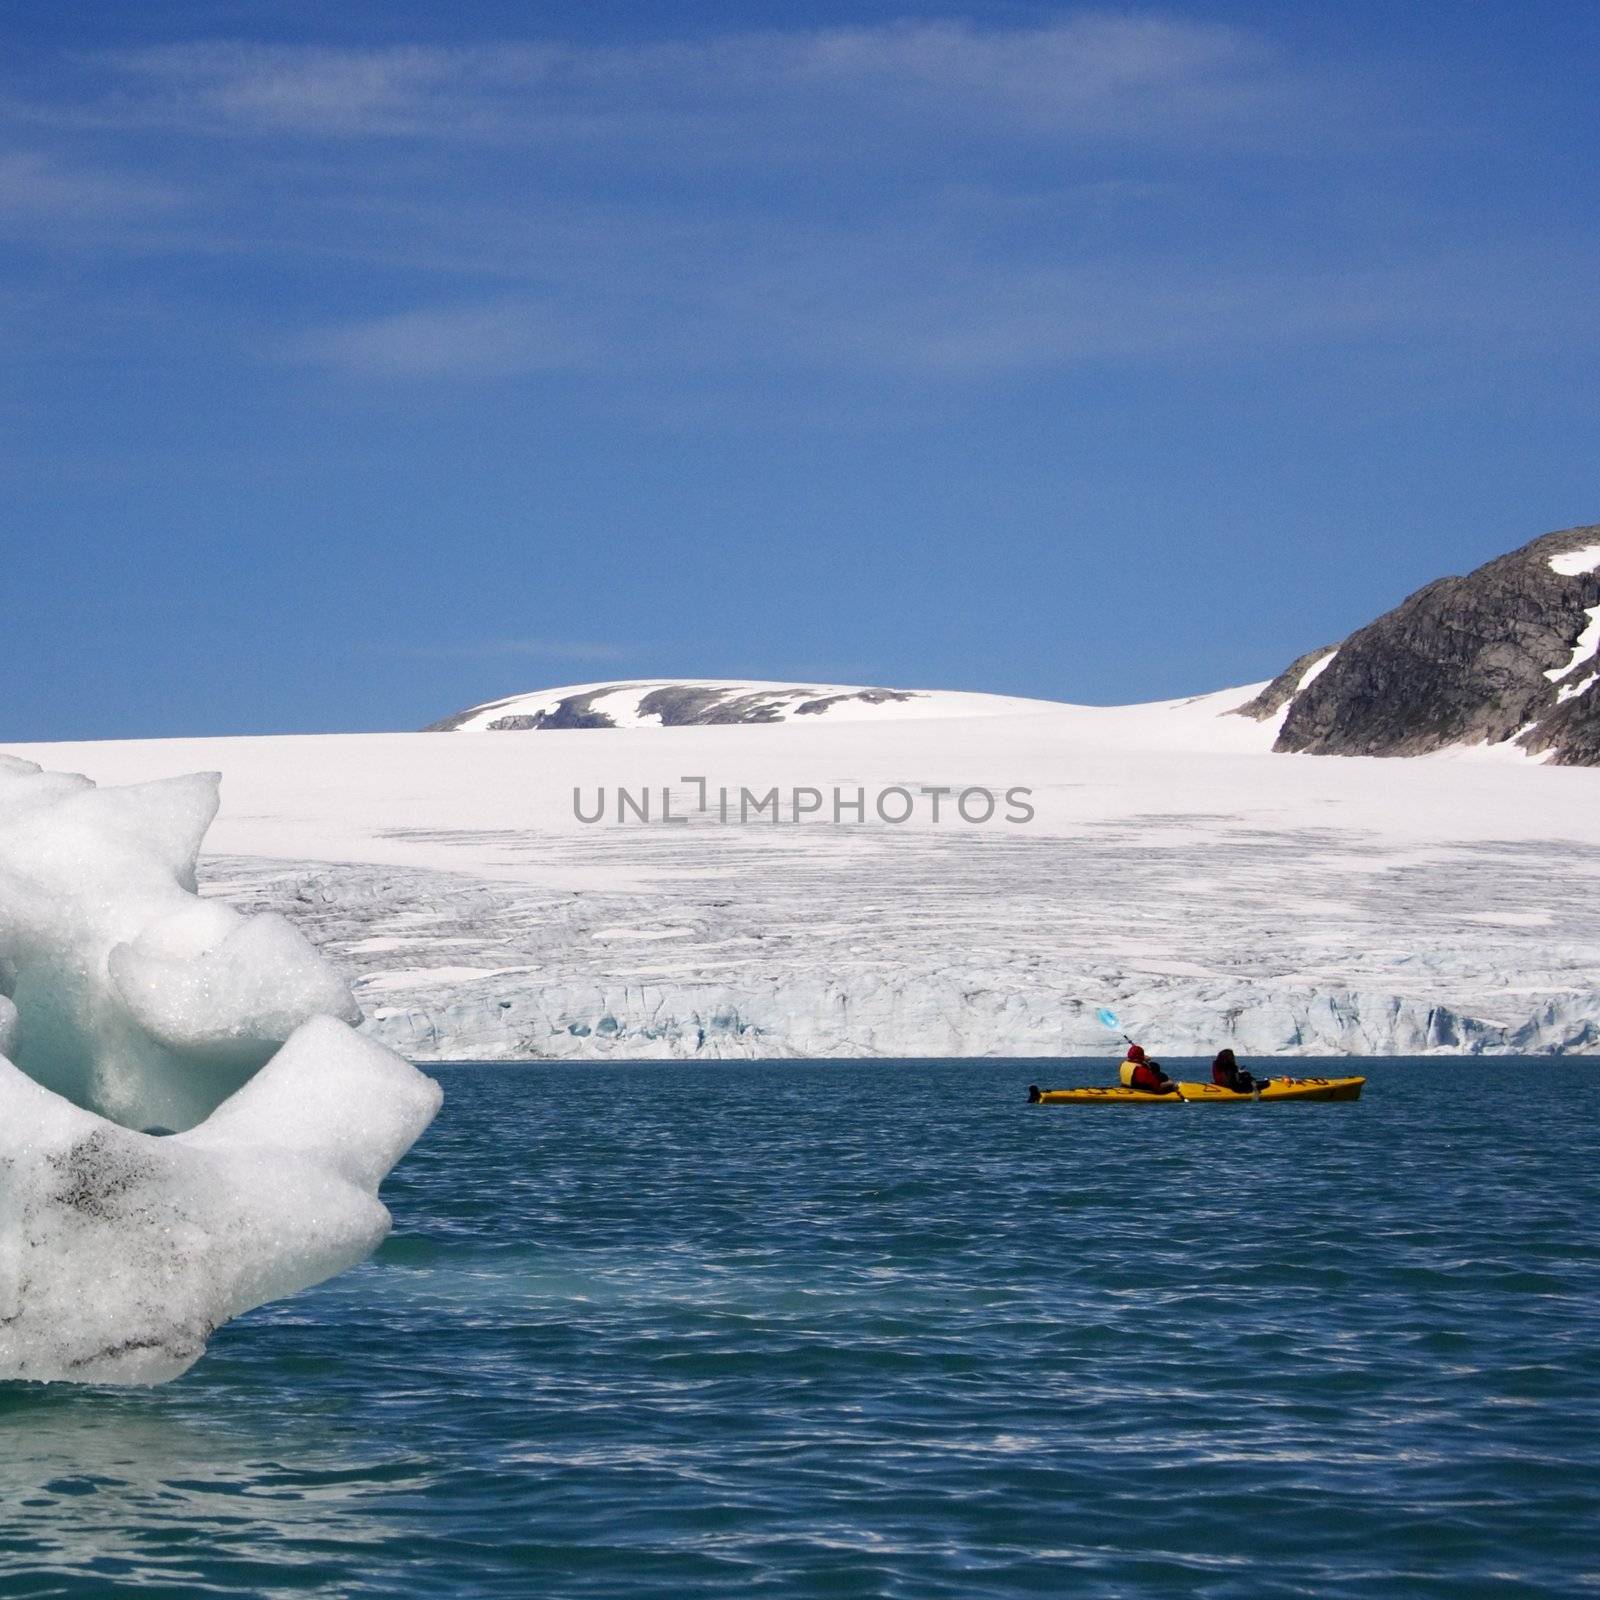 Kayak near glacier front and icebergs in Jostedal, Norway